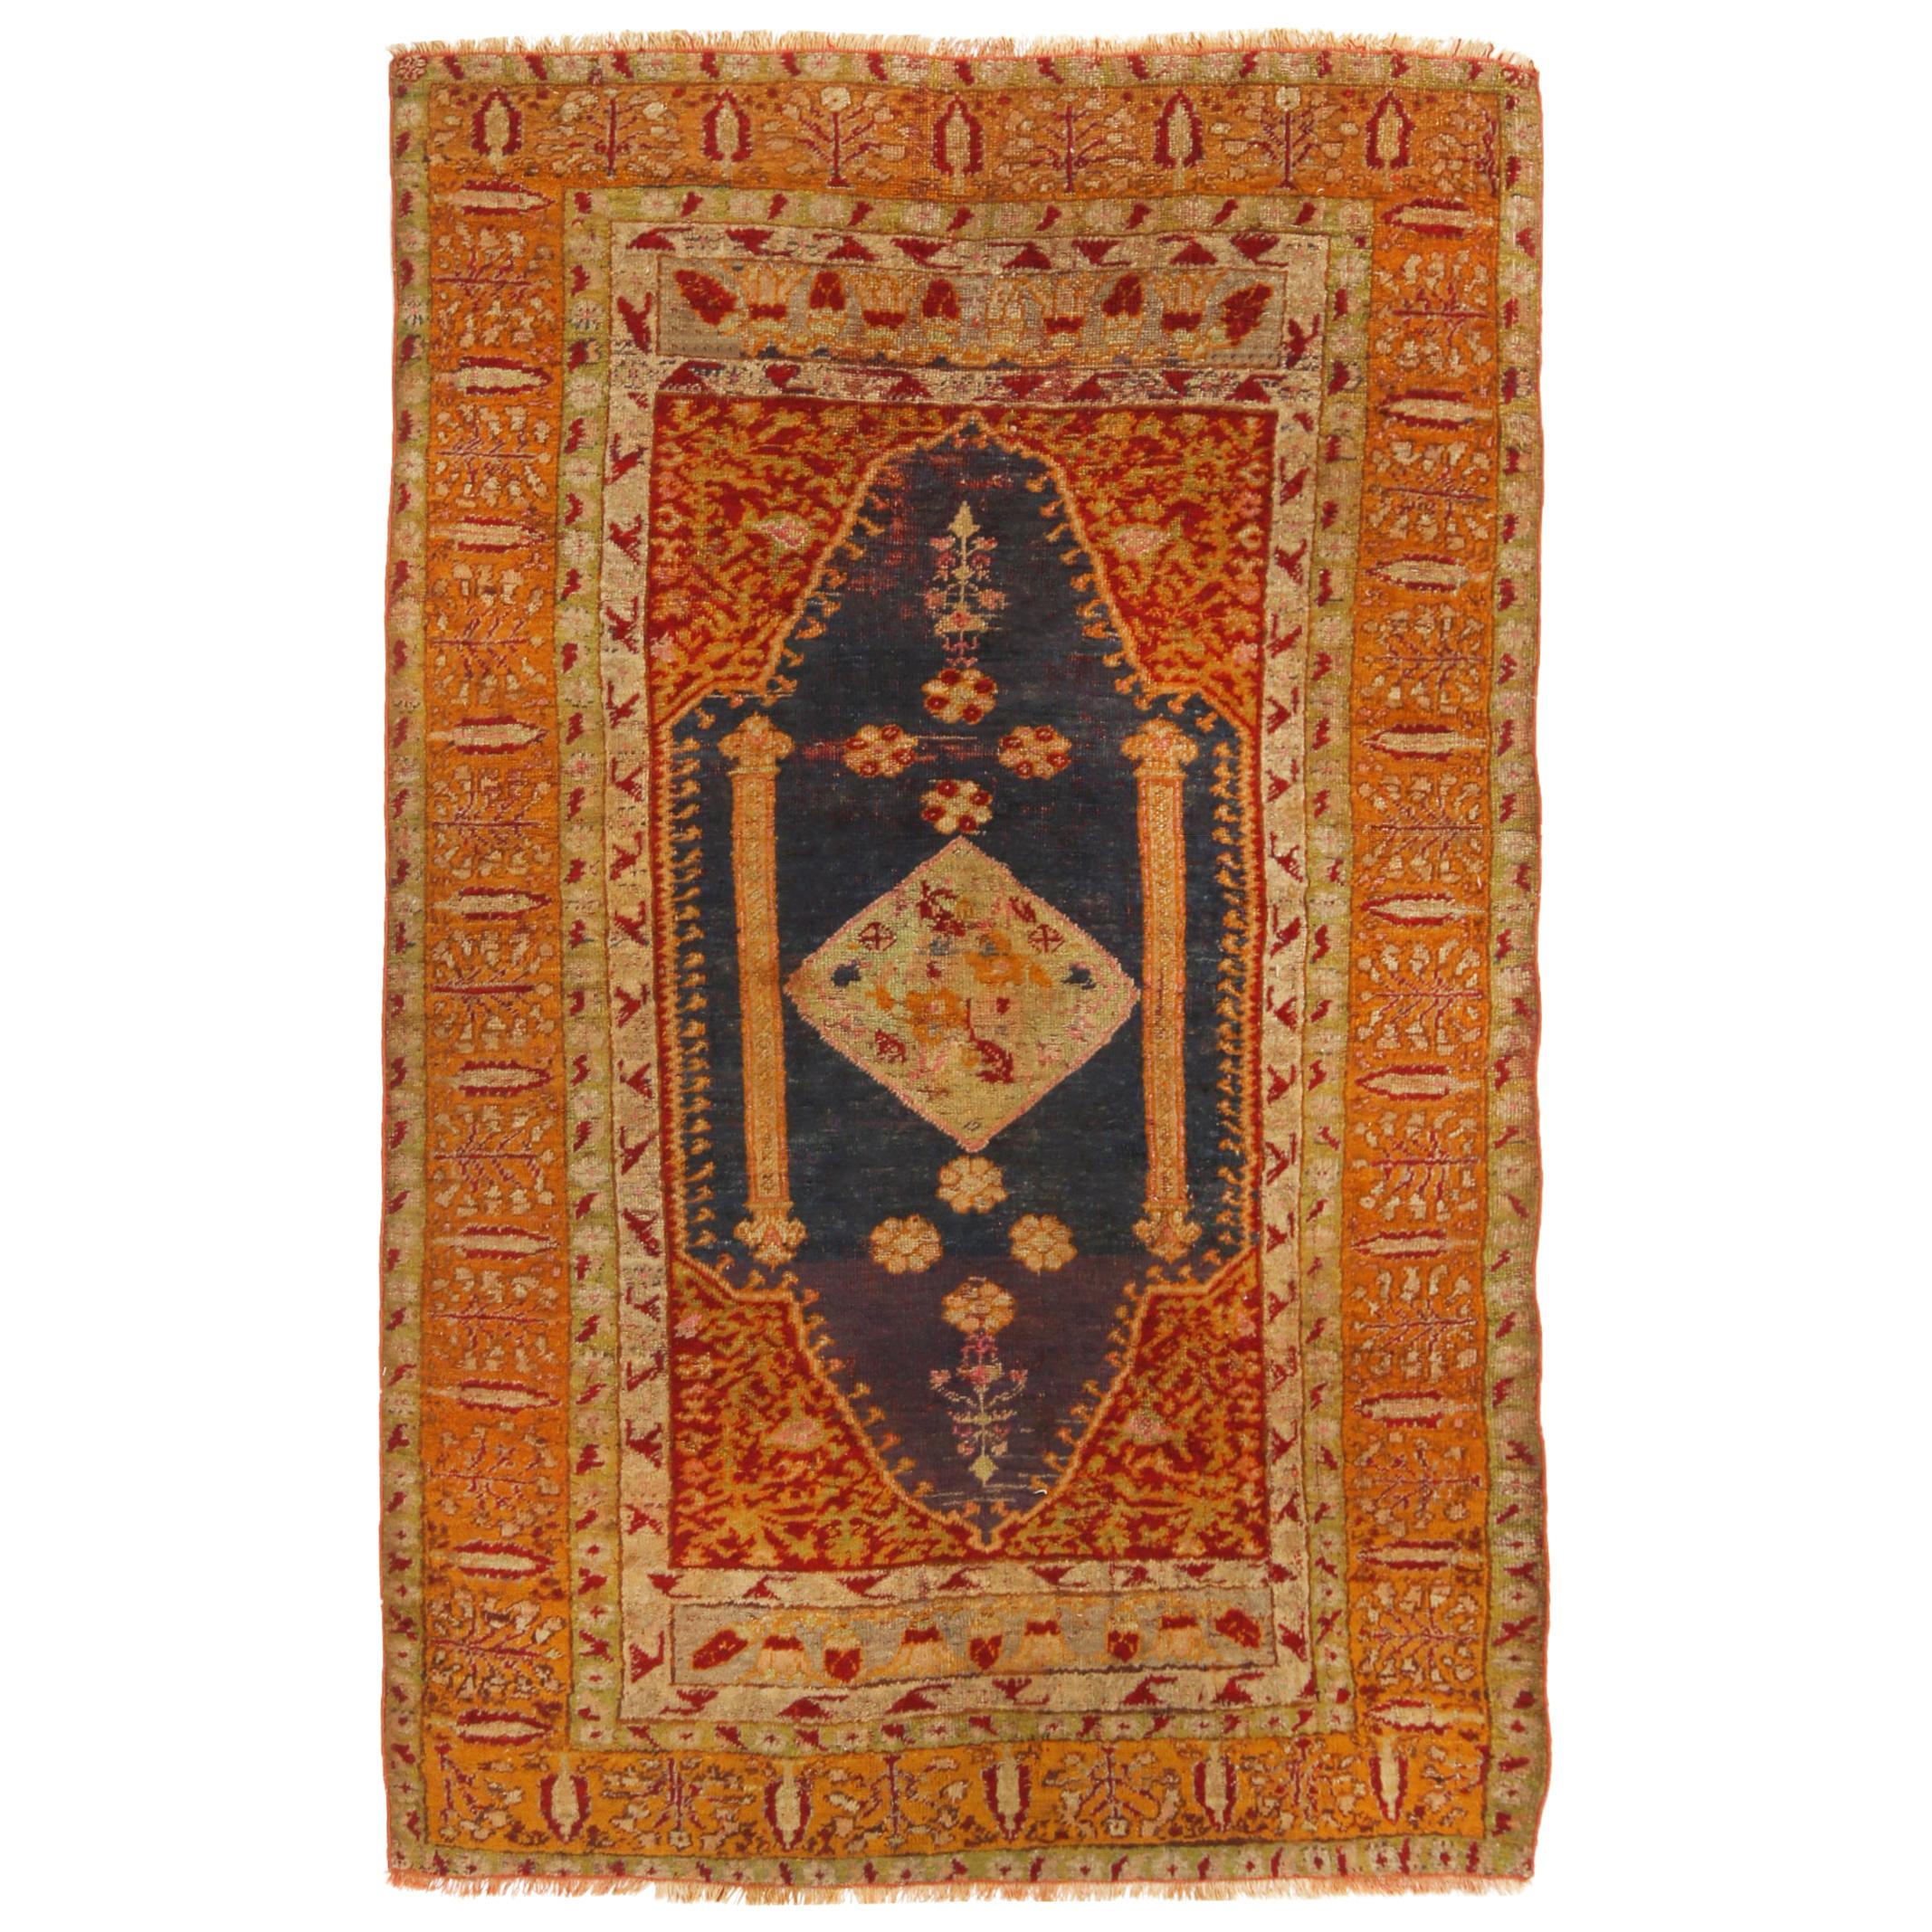 Antique Oushak Traditional Orange-Gold and Red Wool Rug